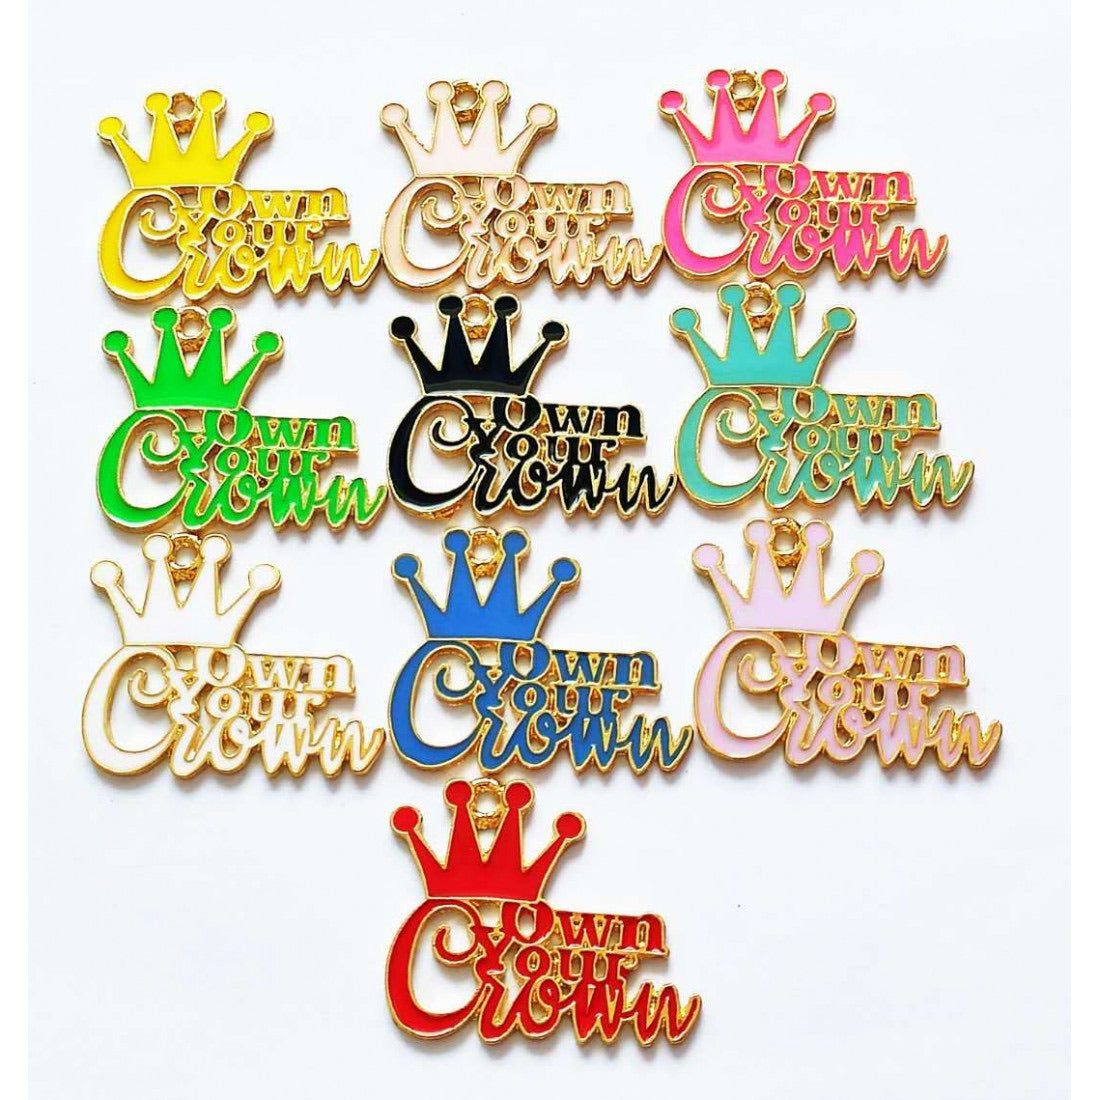 Own your Crown Charm